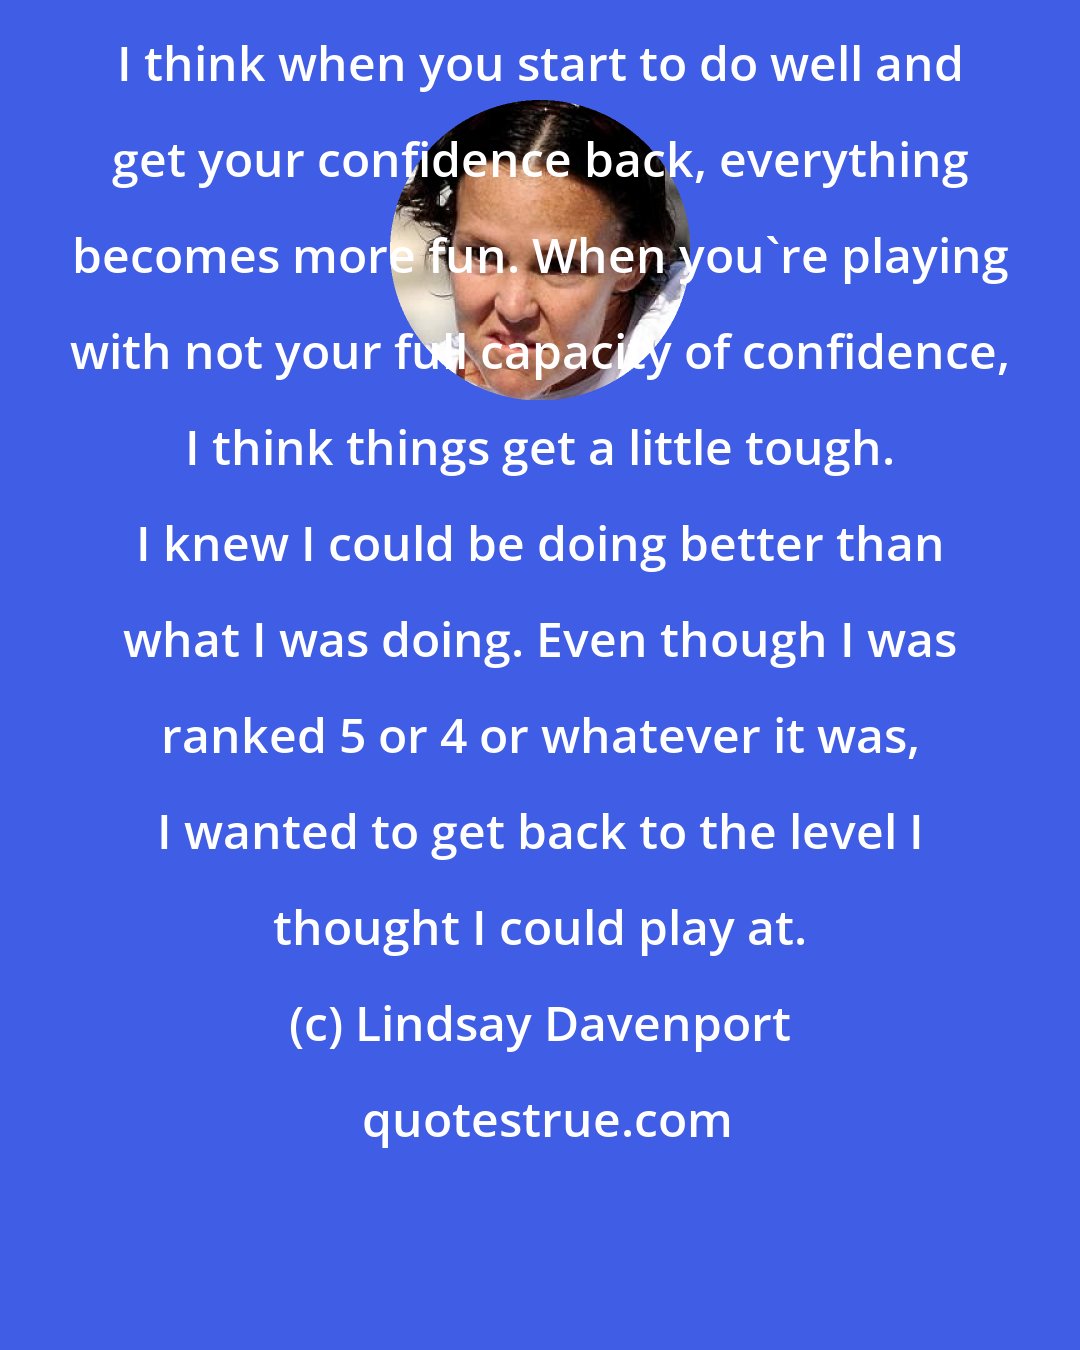 Lindsay Davenport: I think when you start to do well and get your confidence back, everything becomes more fun. When you're playing with not your full capacity of confidence, I think things get a little tough. I knew I could be doing better than what I was doing. Even though I was ranked 5 or 4 or whatever it was, I wanted to get back to the level I thought I could play at.